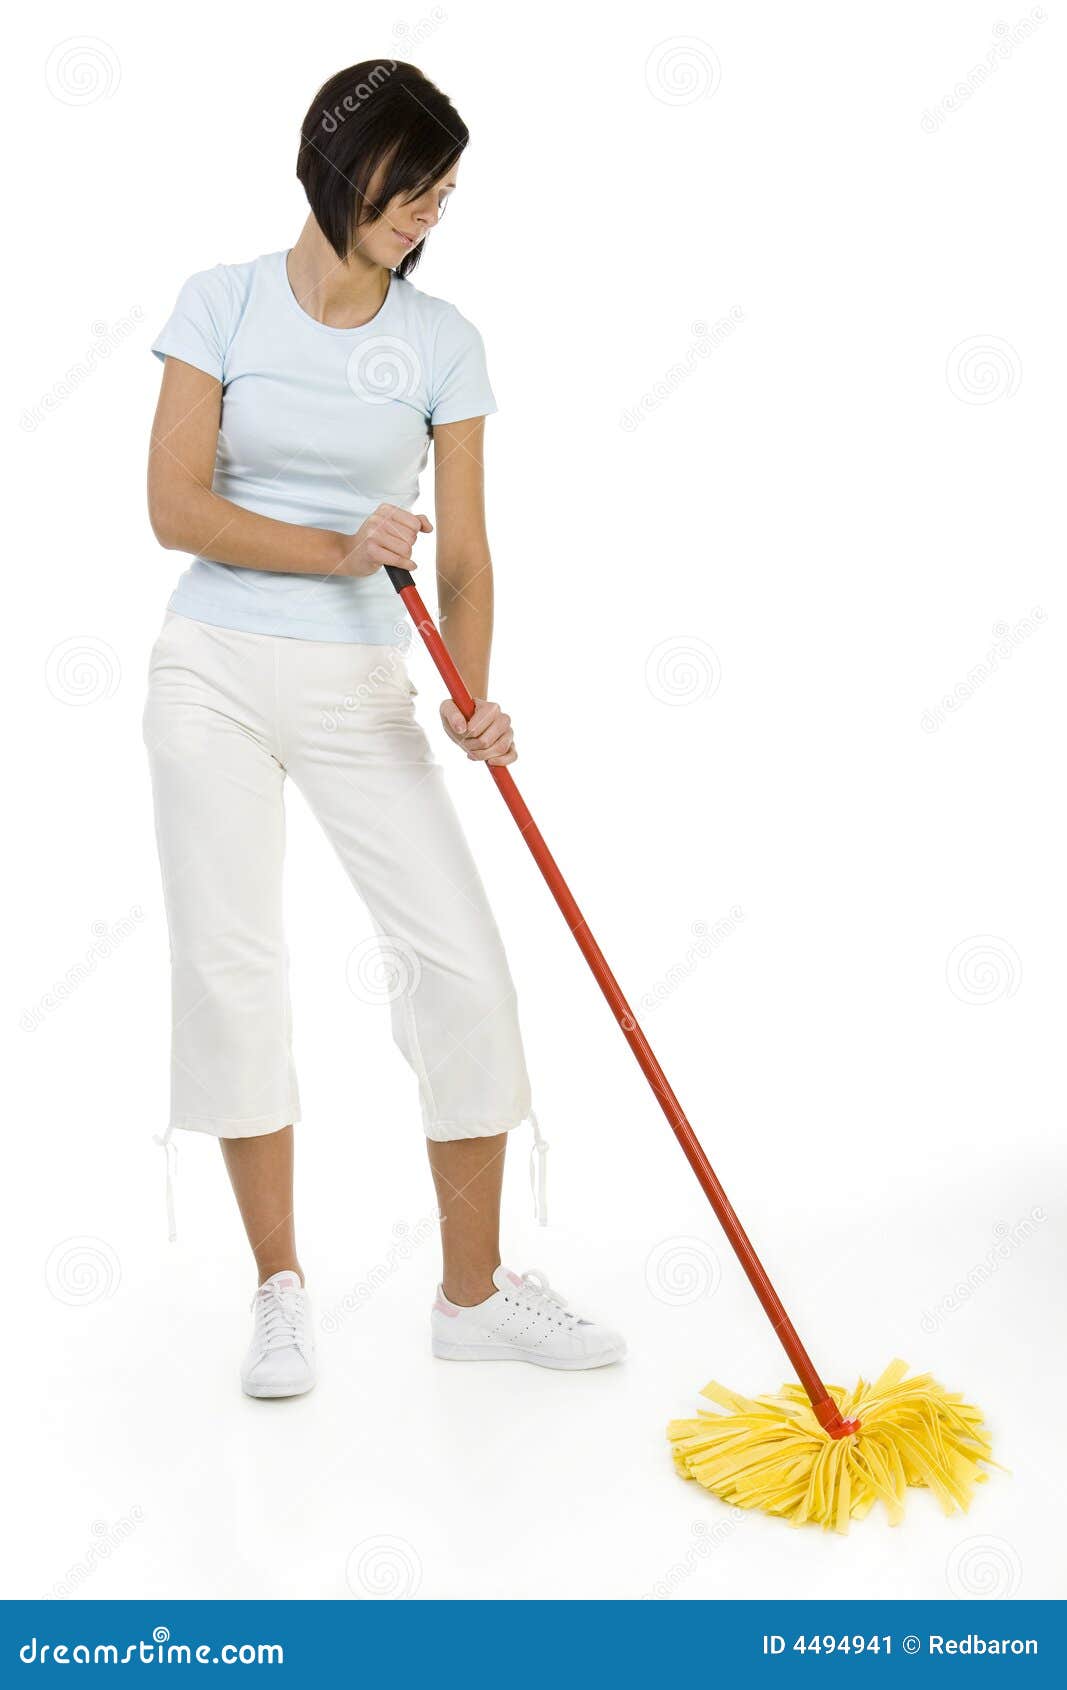 Cleaning Of The Floor Stock Image Image Of Polish Caucasian